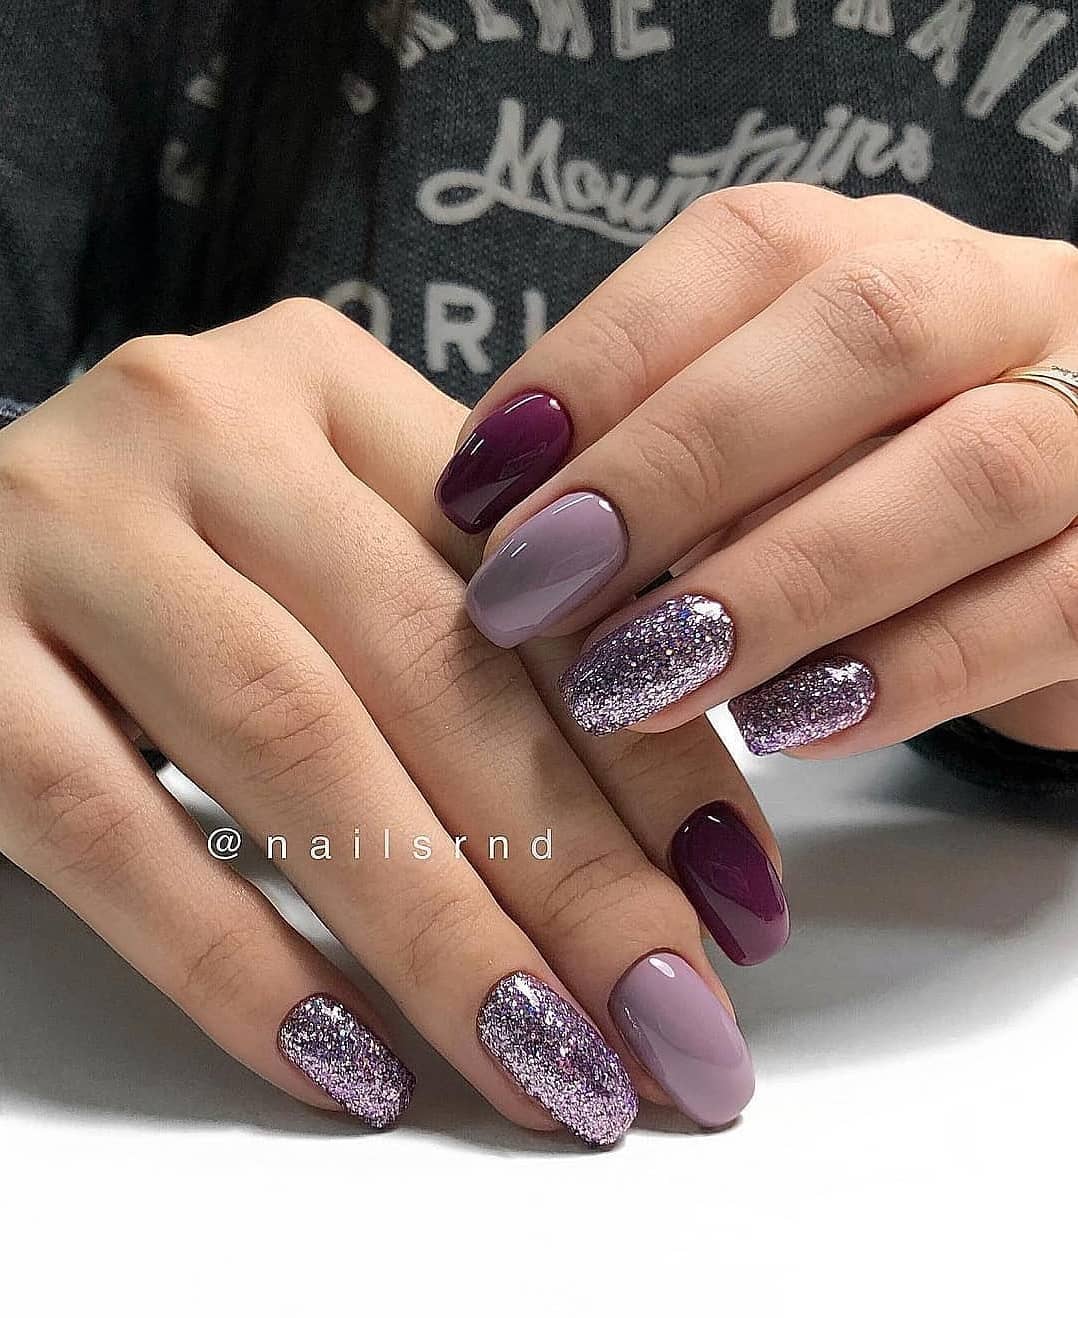 The Fall 2021 Nail Trends To Inspire Your Next Manicure images 23